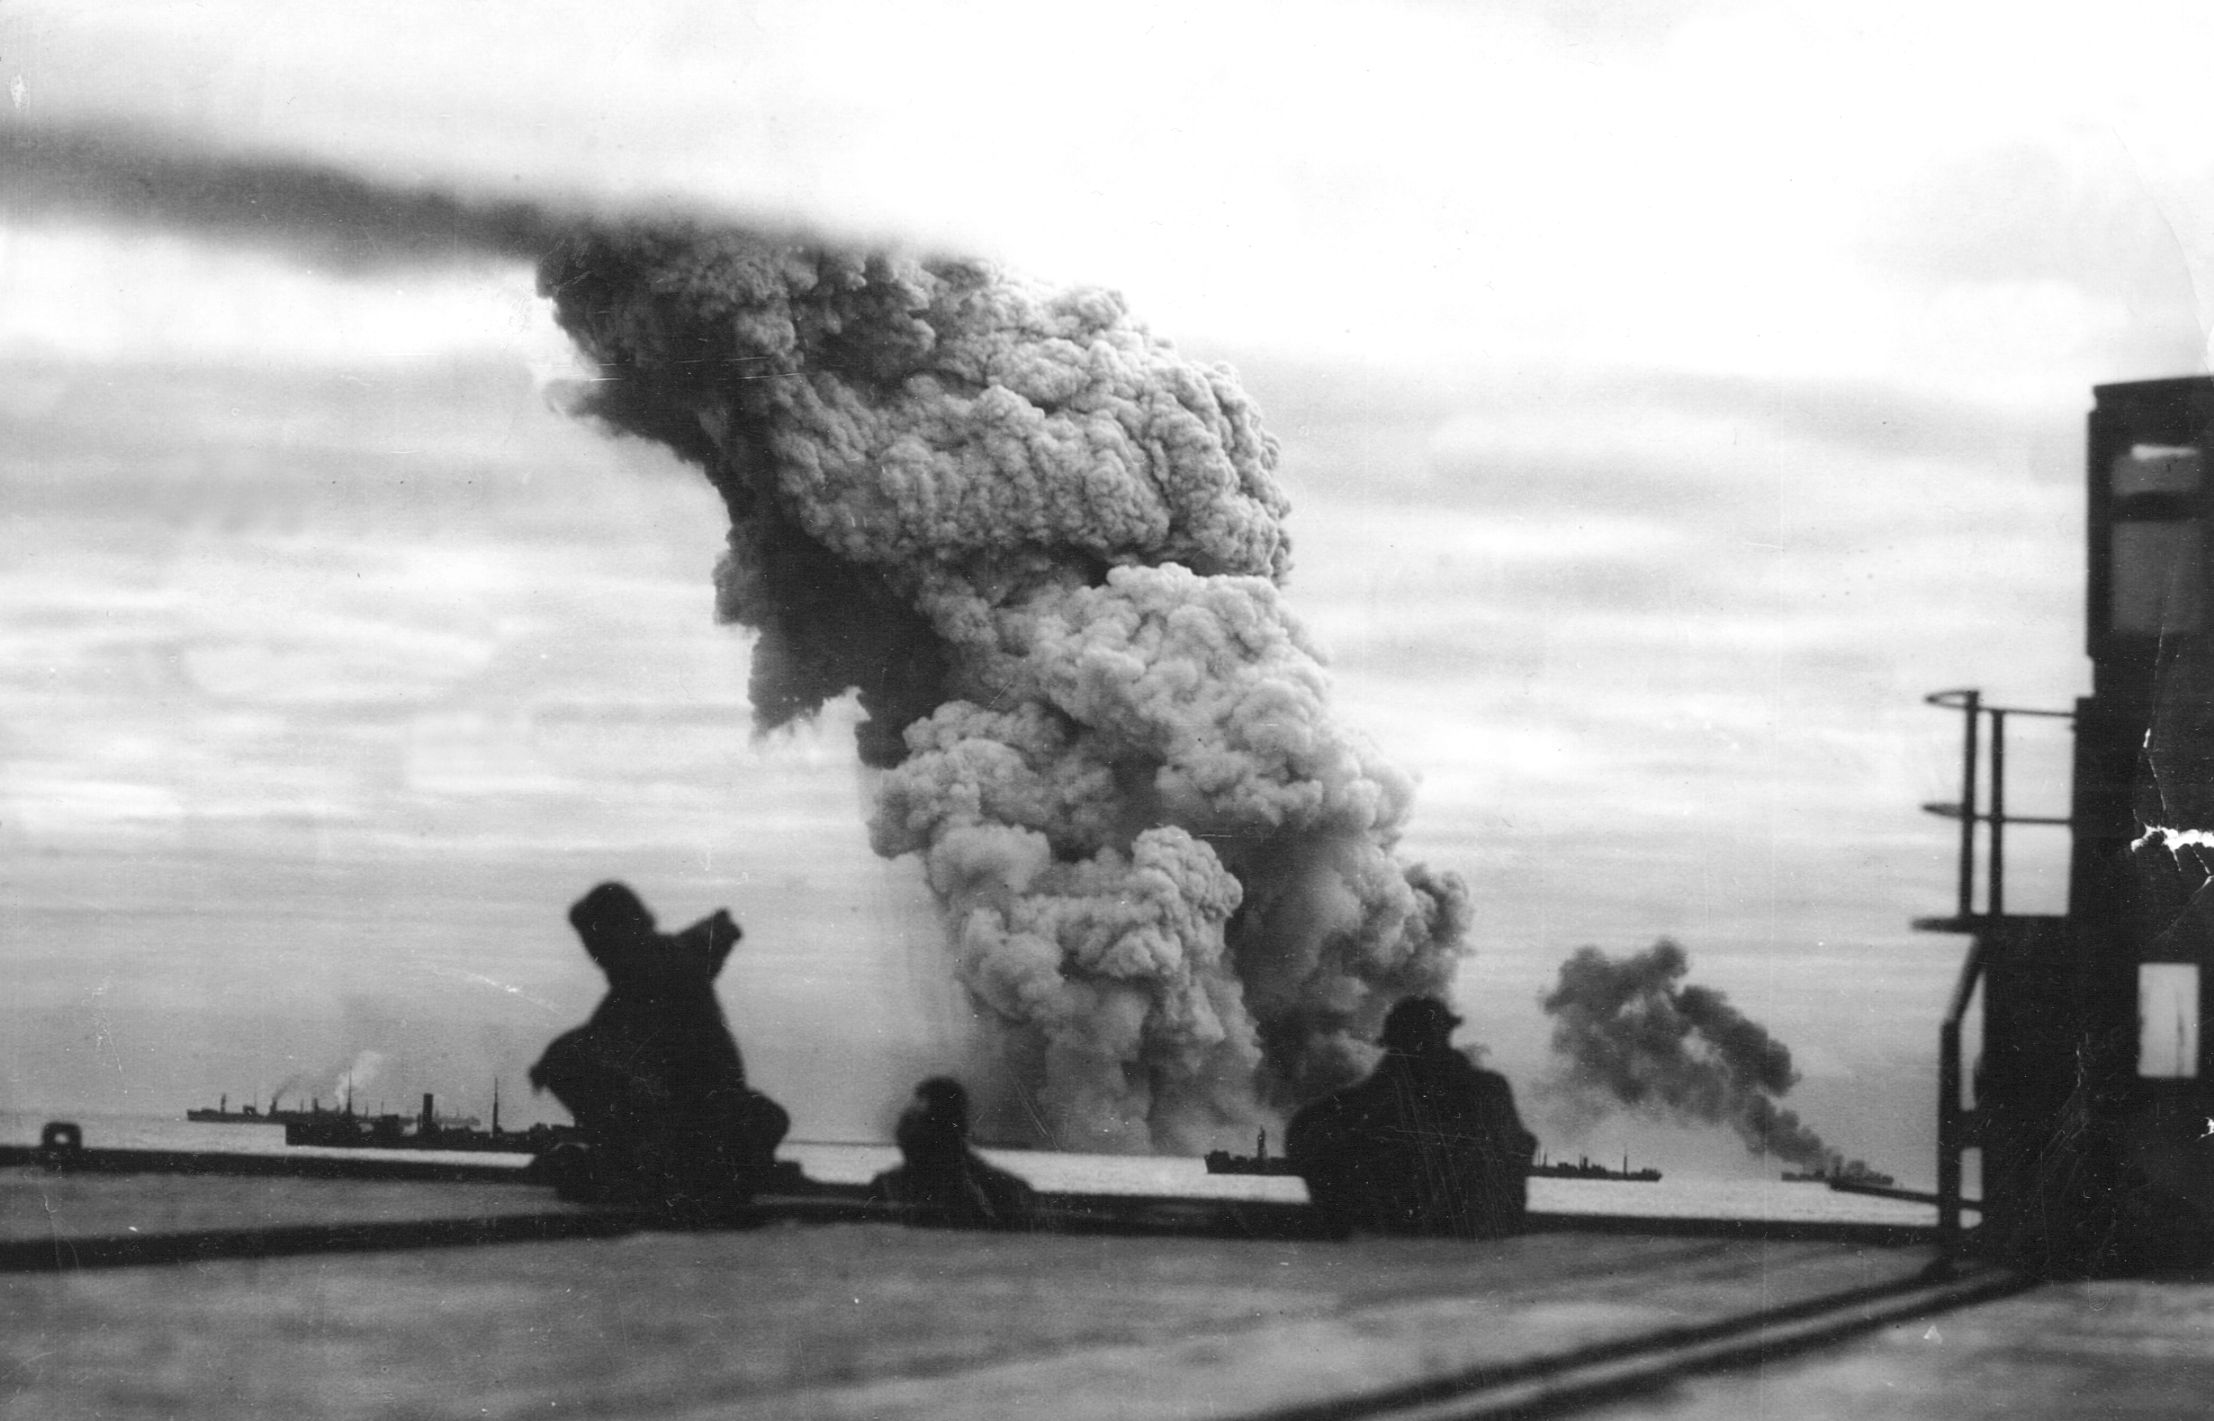 Victims of a German air attack, two Allied merchant ships billow smoke while sailors aboard other vessels look on in October 1942. Despite fearful losses, convoys continued to deliver vital supplies to the Soviet Union.